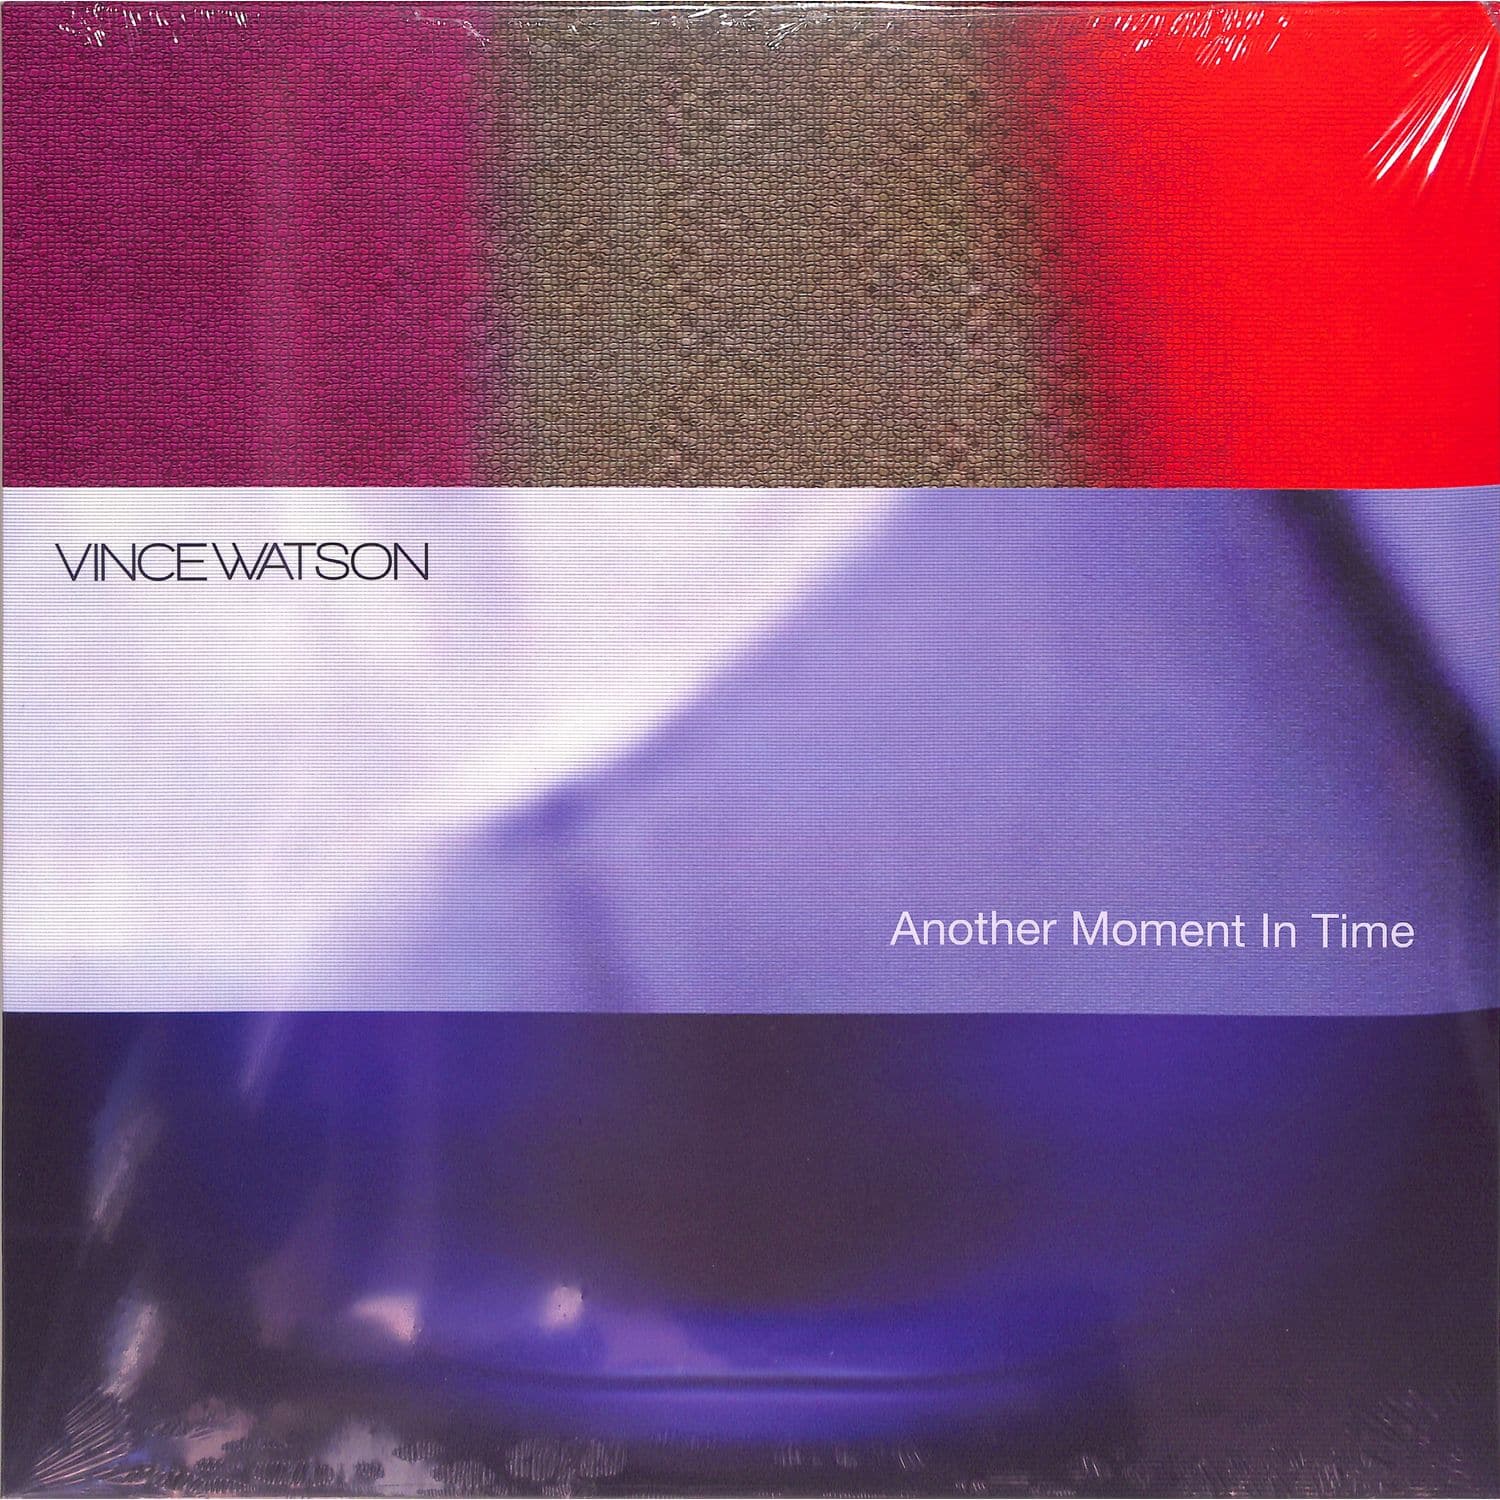 Vince Watson - ANOTHER MOMENT IN TIME 